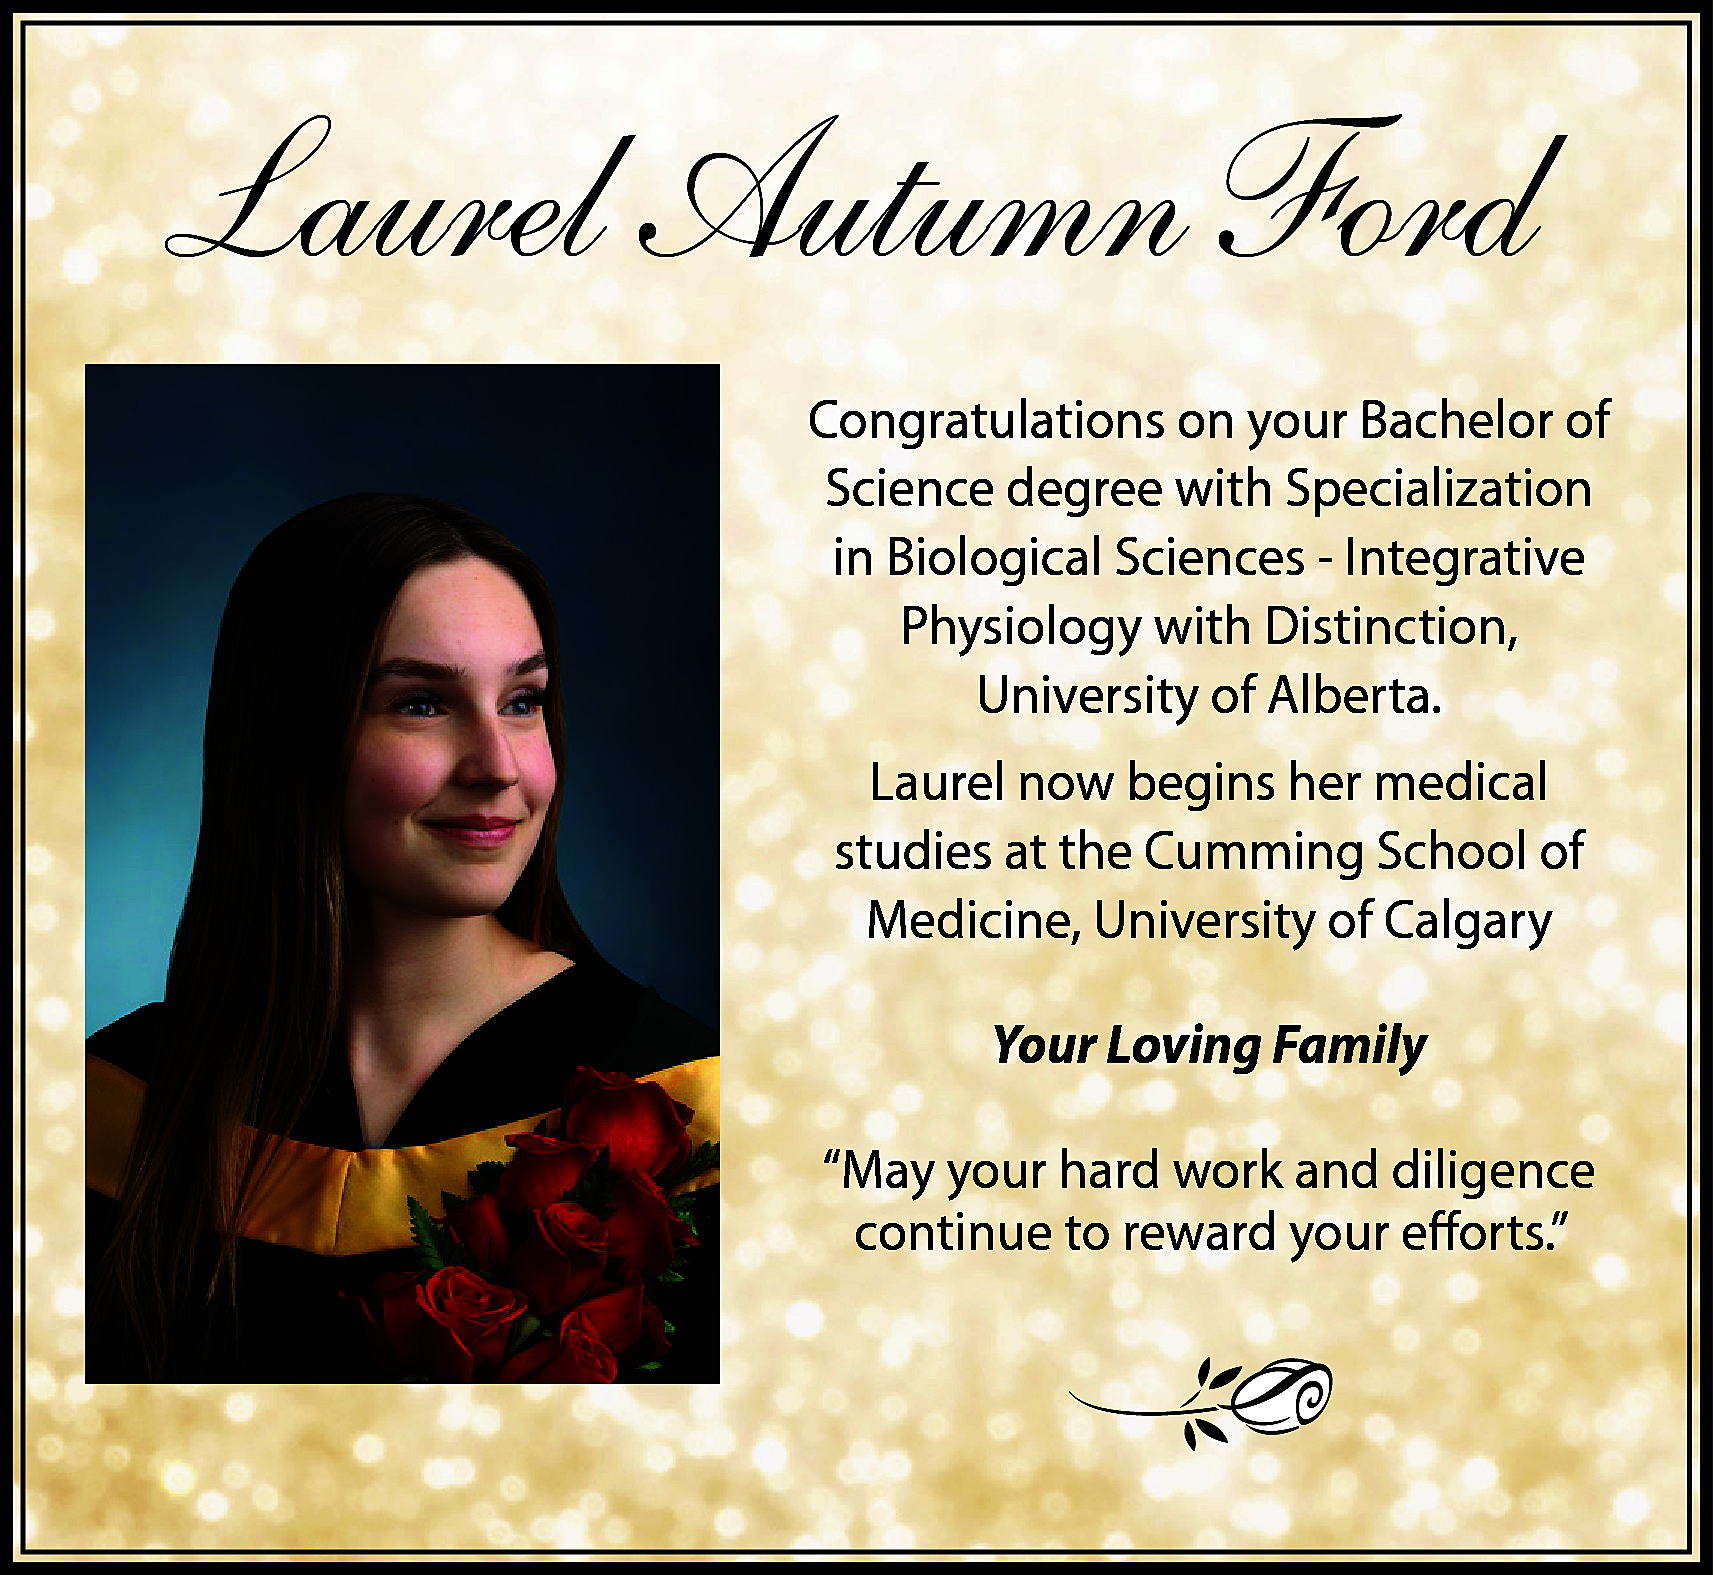 Laurel Autumn Ford <br>Congratulations on  Laurel Autumn Ford  Congratulations on your Bachelor of  Science degree with Specialization  in Biological Sciences - Integrative  Physiology with Distinction,  University of Alberta.  Laurel now begins her medical  studies at the Cumming School of  Medicine, University of Calgary  Your Loving Family  “May your hard work and diligence  continue to reward your efforts.”    